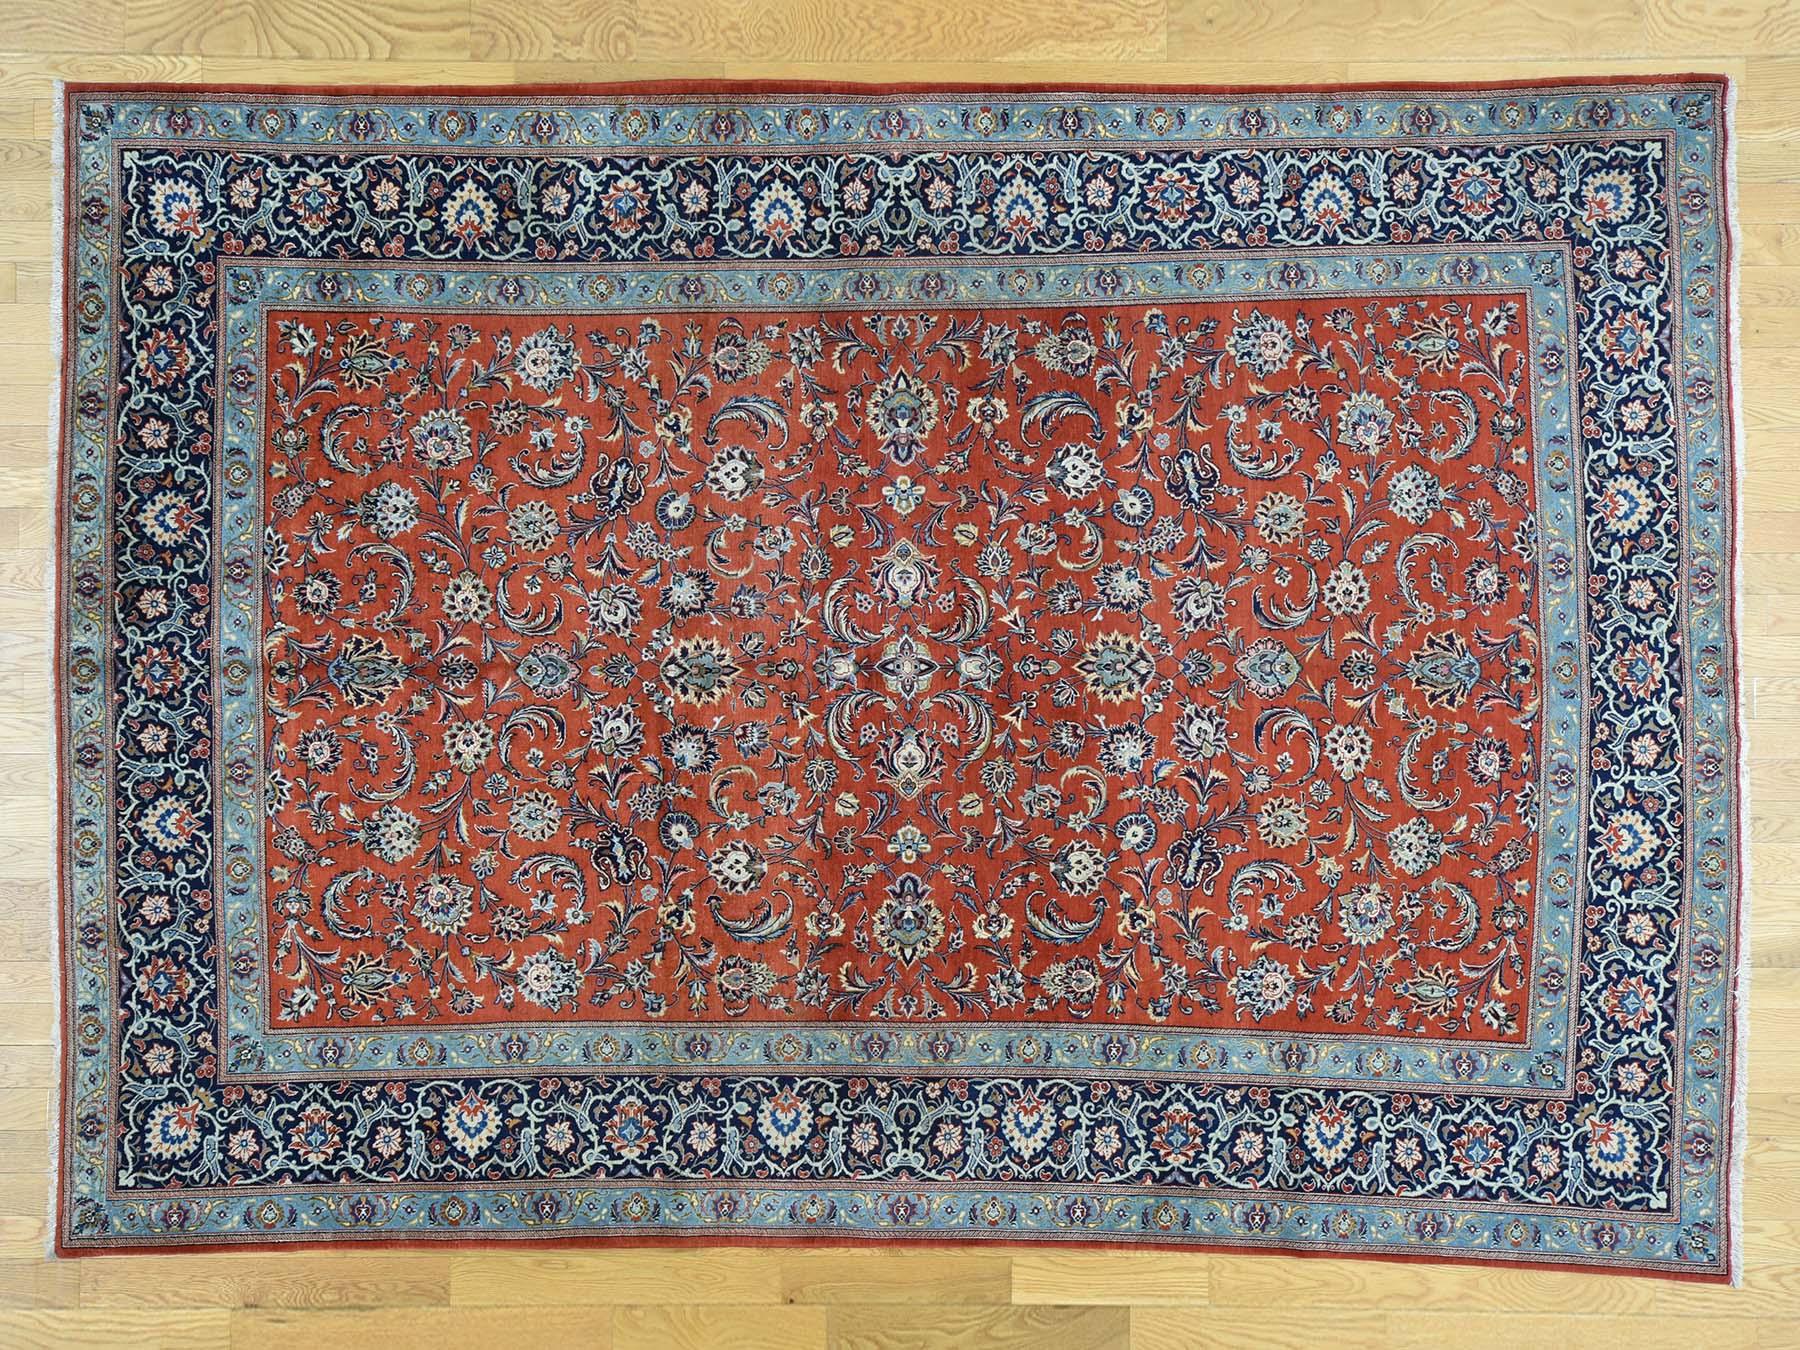 This is a genuine hand knotted oriental rug. It is not hand tufted or machine made rug. Our entire inventory is made of either hand knotted or handwoven rugs.

Bring life to your home with this fascinating hand knotted carpet. This handcrafted